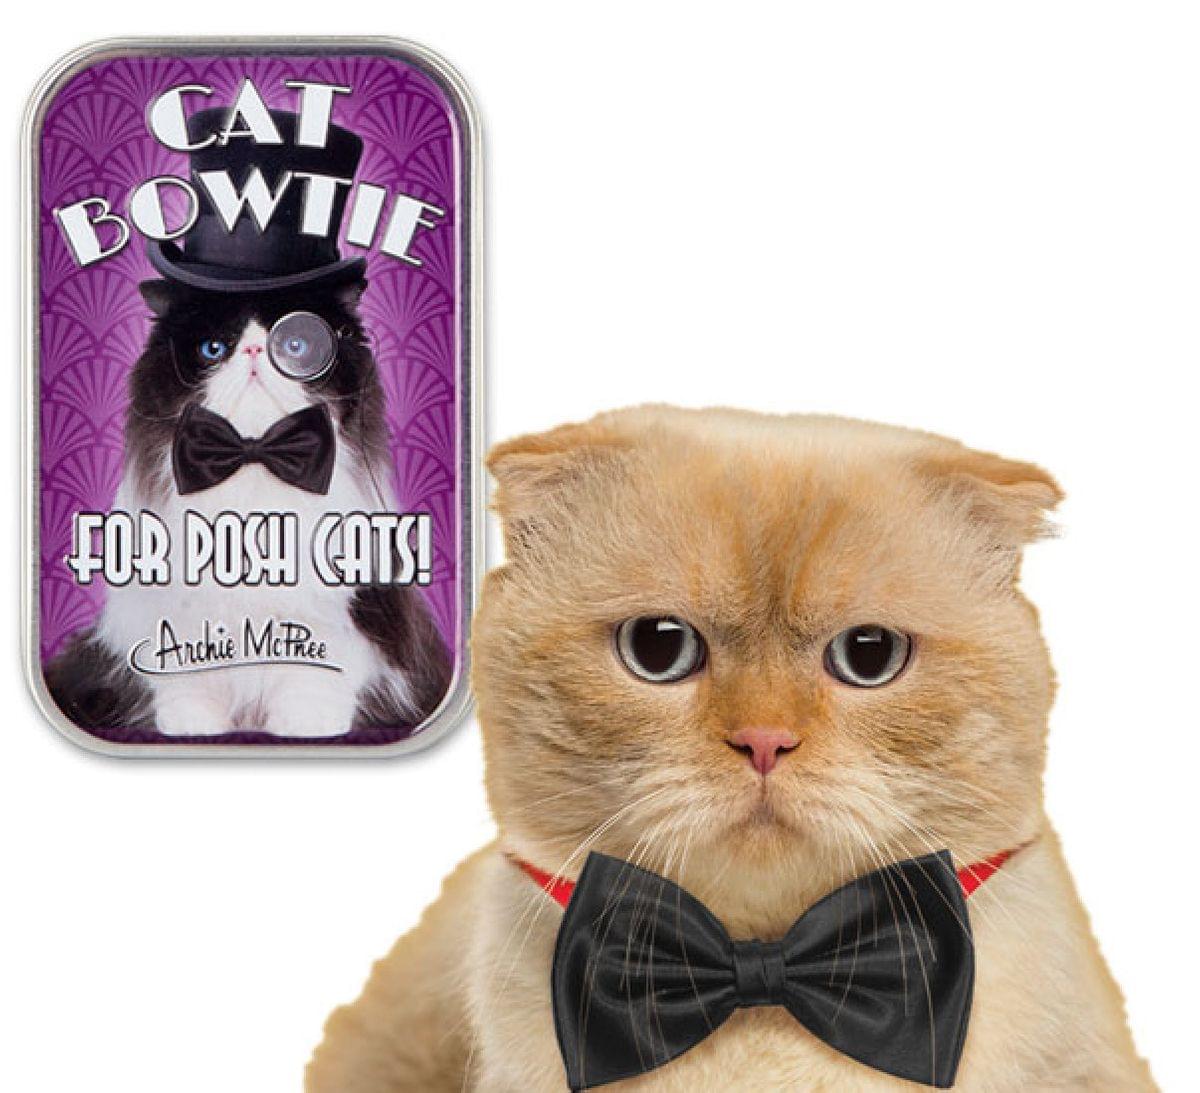 Bow Tie For Cats in Collectible Tin